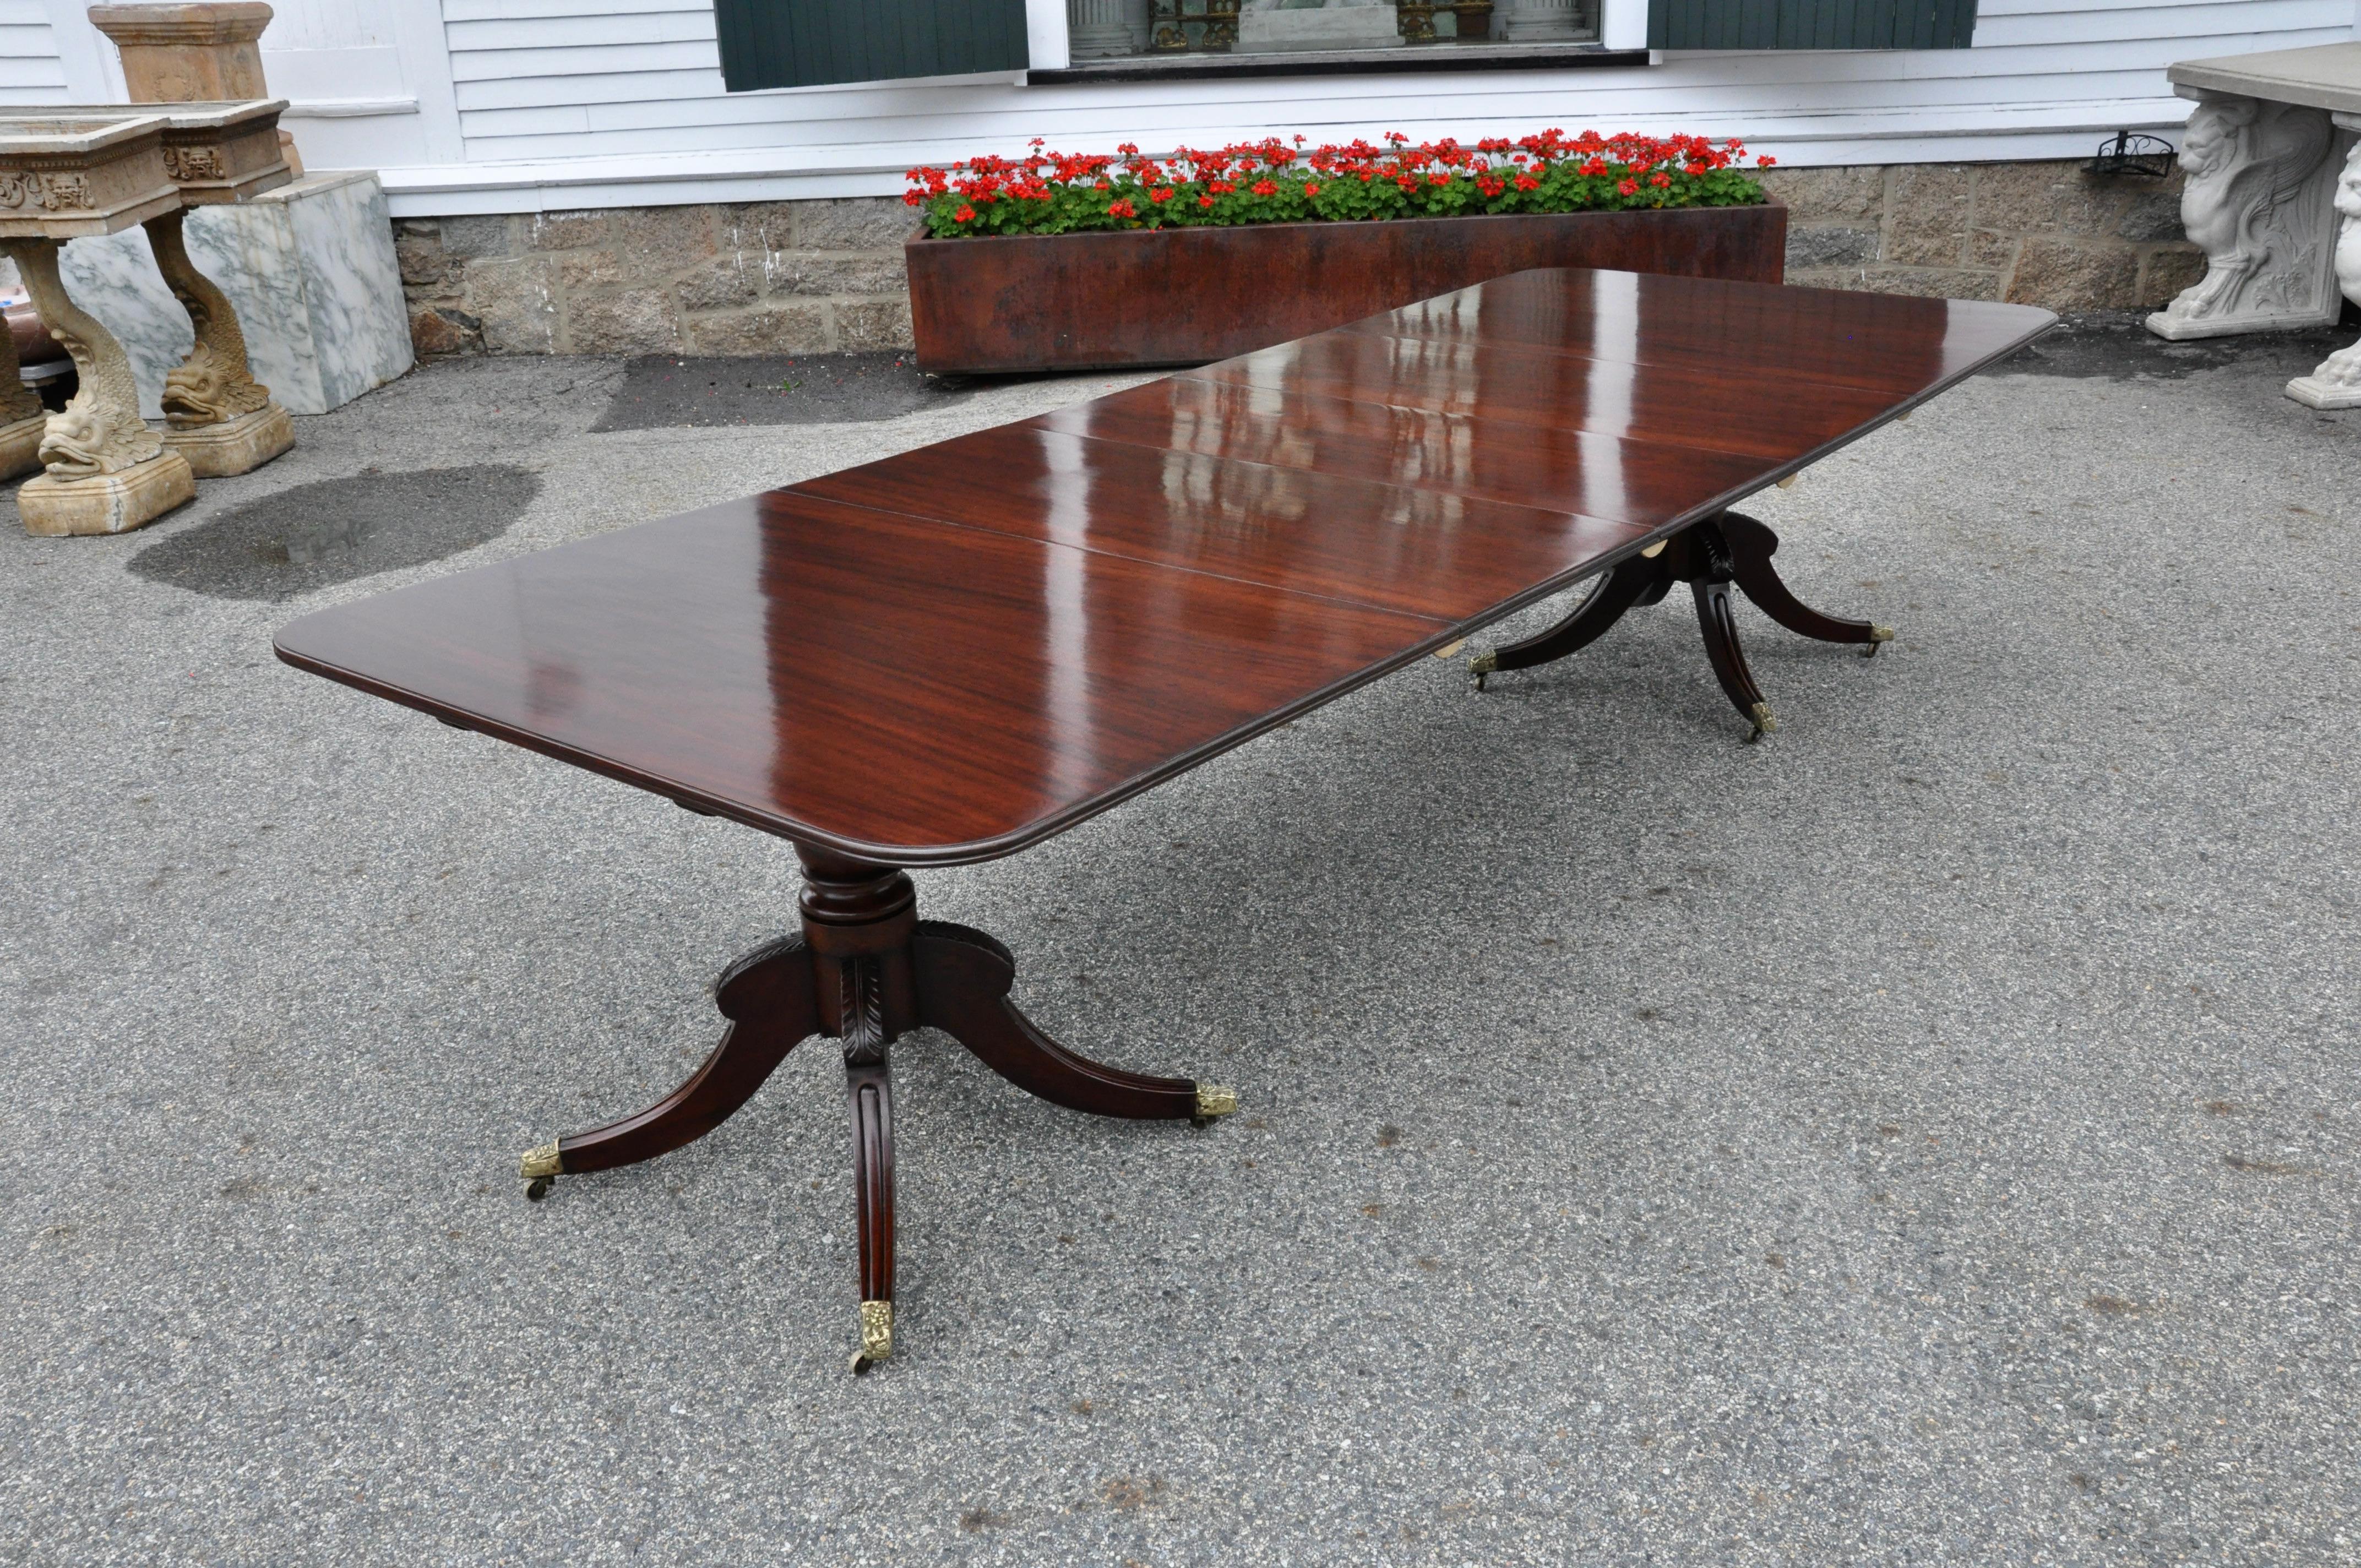 Solid mahogany two pedestal dining table with three leaves. Matching wood figuring and color. Wonderful carved pedestals with Regency legs and brass casters. French polish

Without leaves: 68